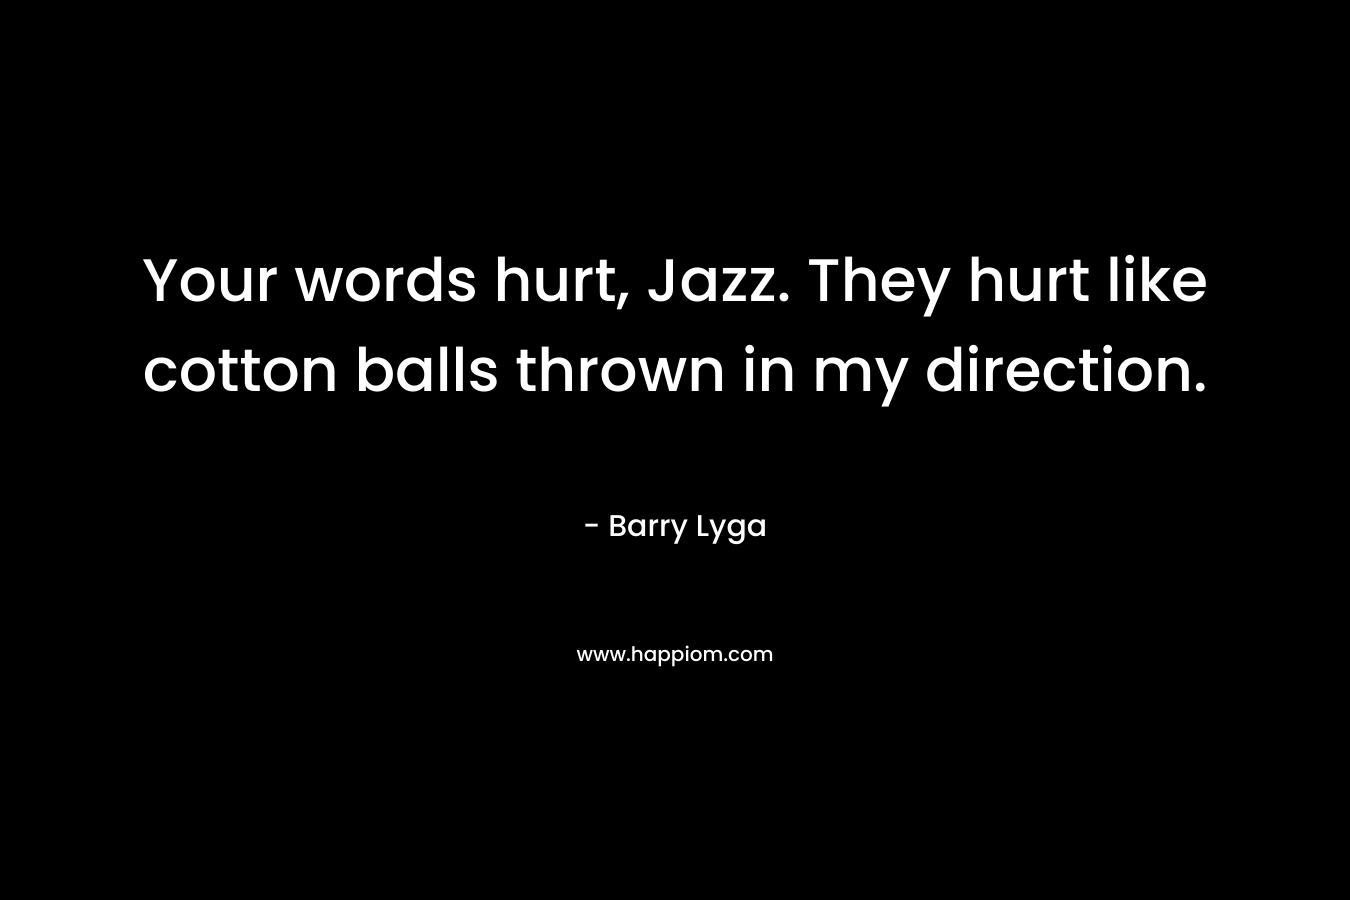 Your words hurt, Jazz. They hurt like cotton balls thrown in my direction.